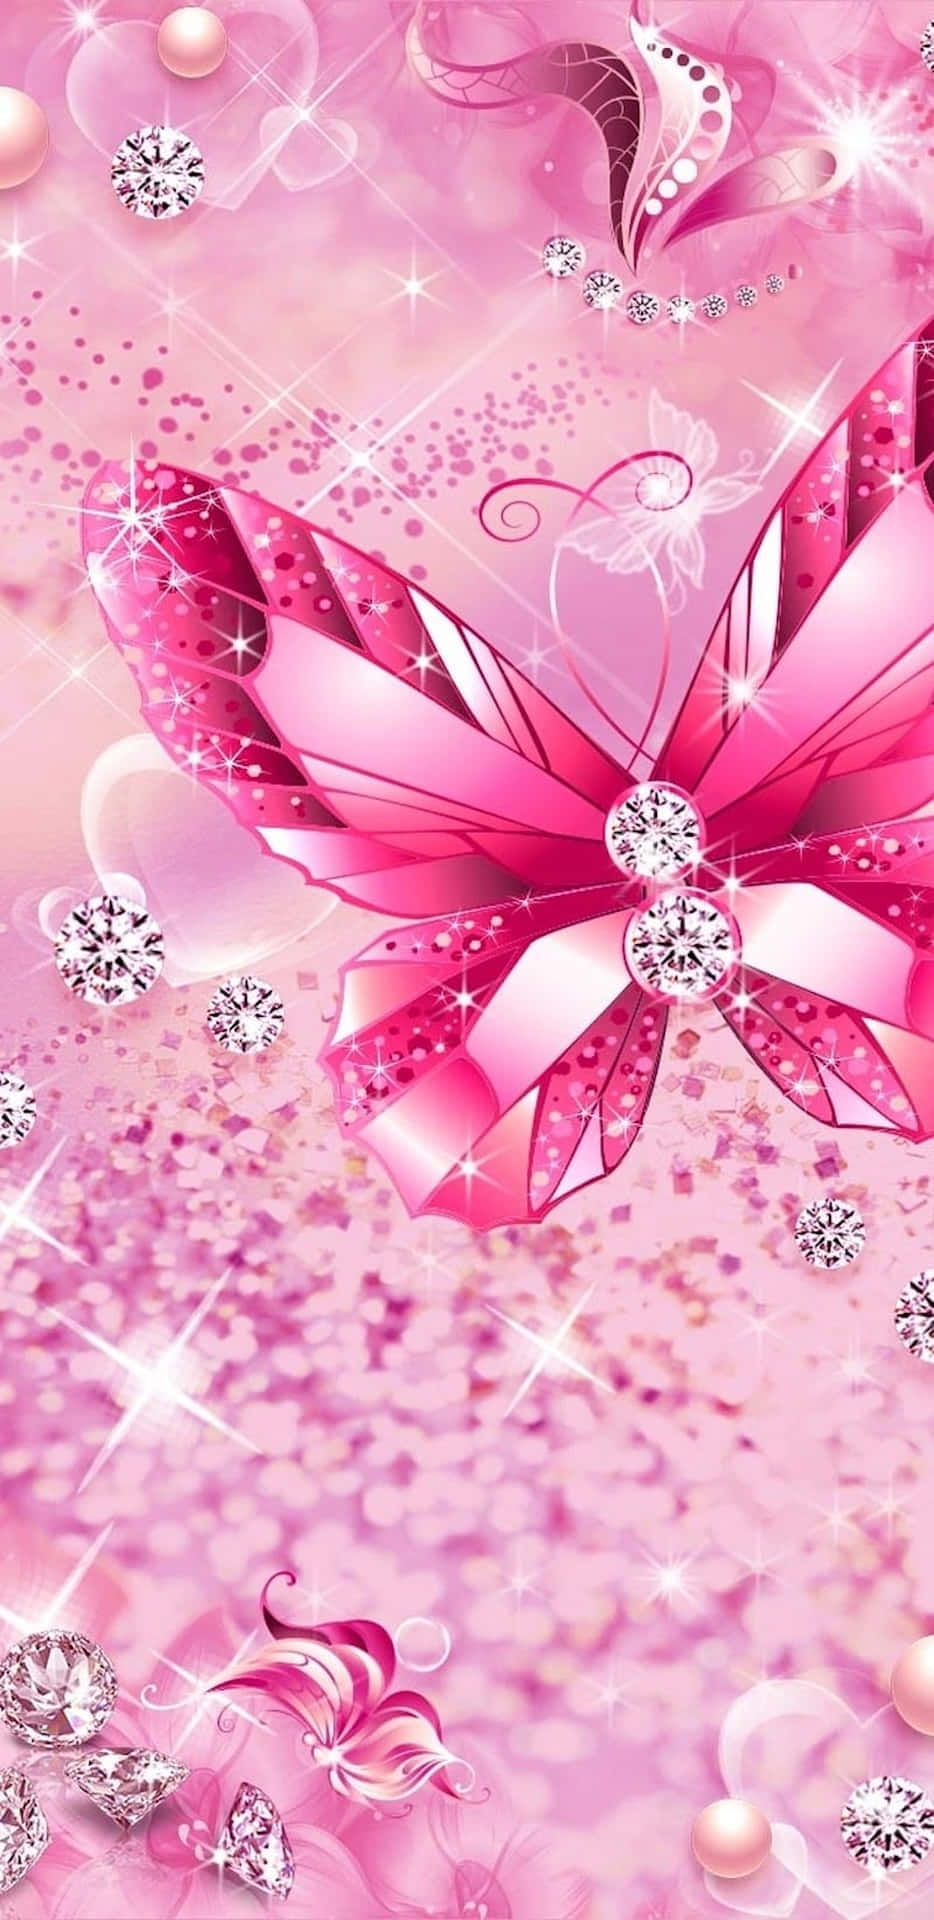 Sparkling Pink Butterfly Background Wallpaper